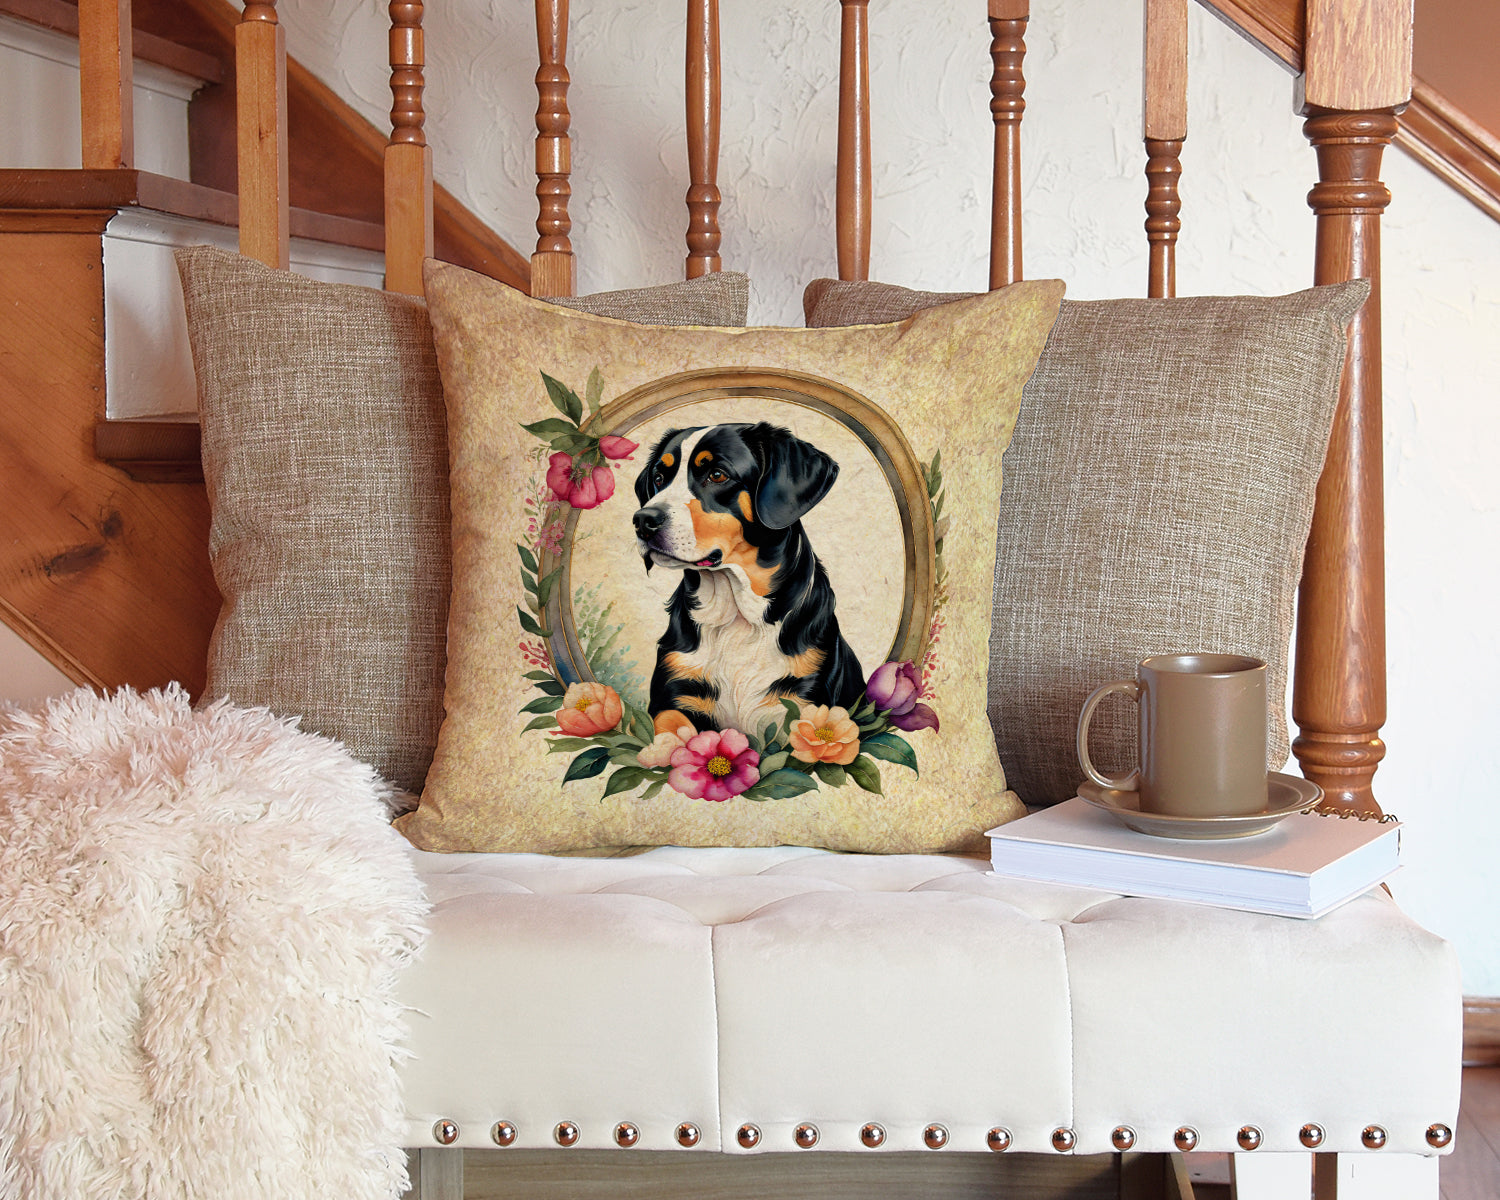 Entlebucher Mountain Dog and Flowers Fabric Decorative Pillow